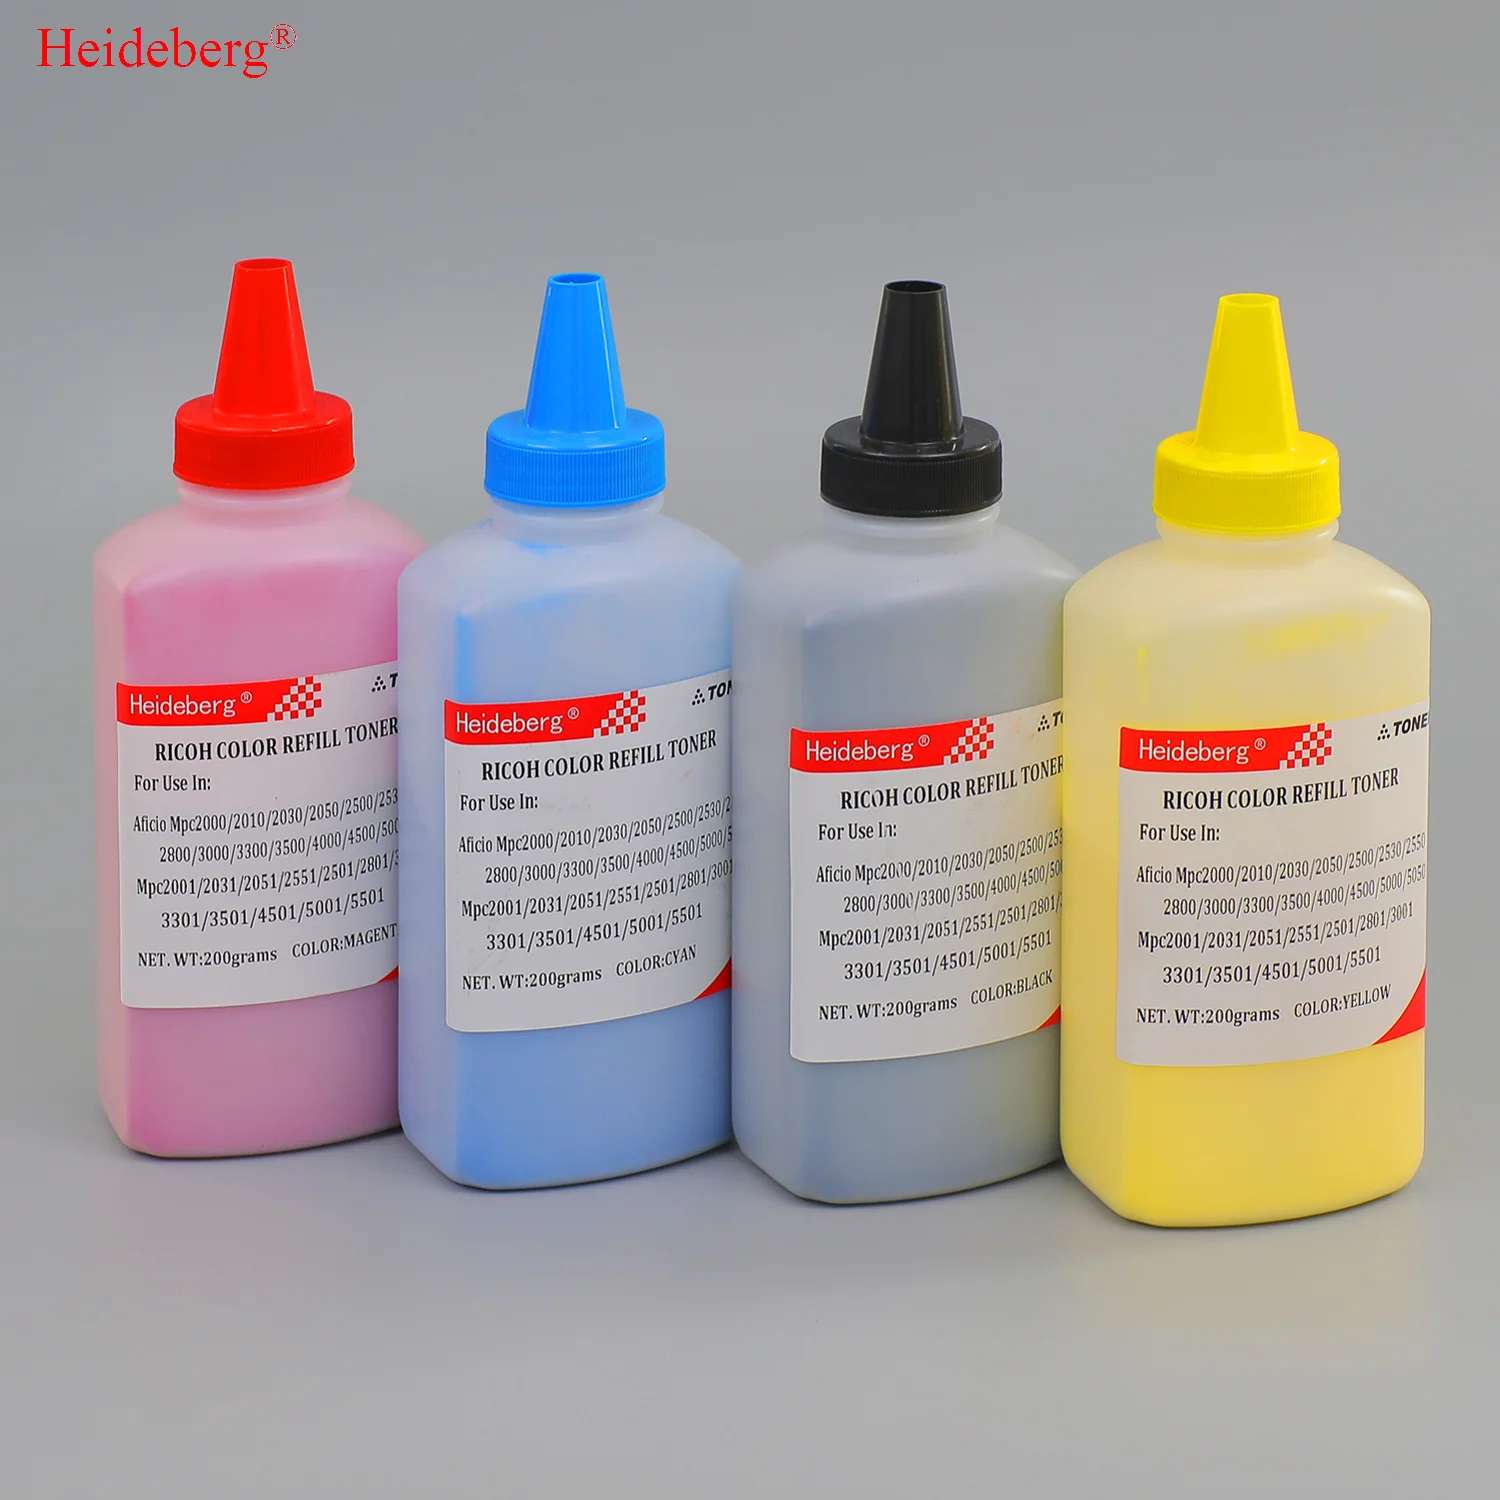 Toner Manufacturer  25 years, MPC3501 Compatible Refill Color Toner Powder for Ricoh MPC3501/3001/2800/3300